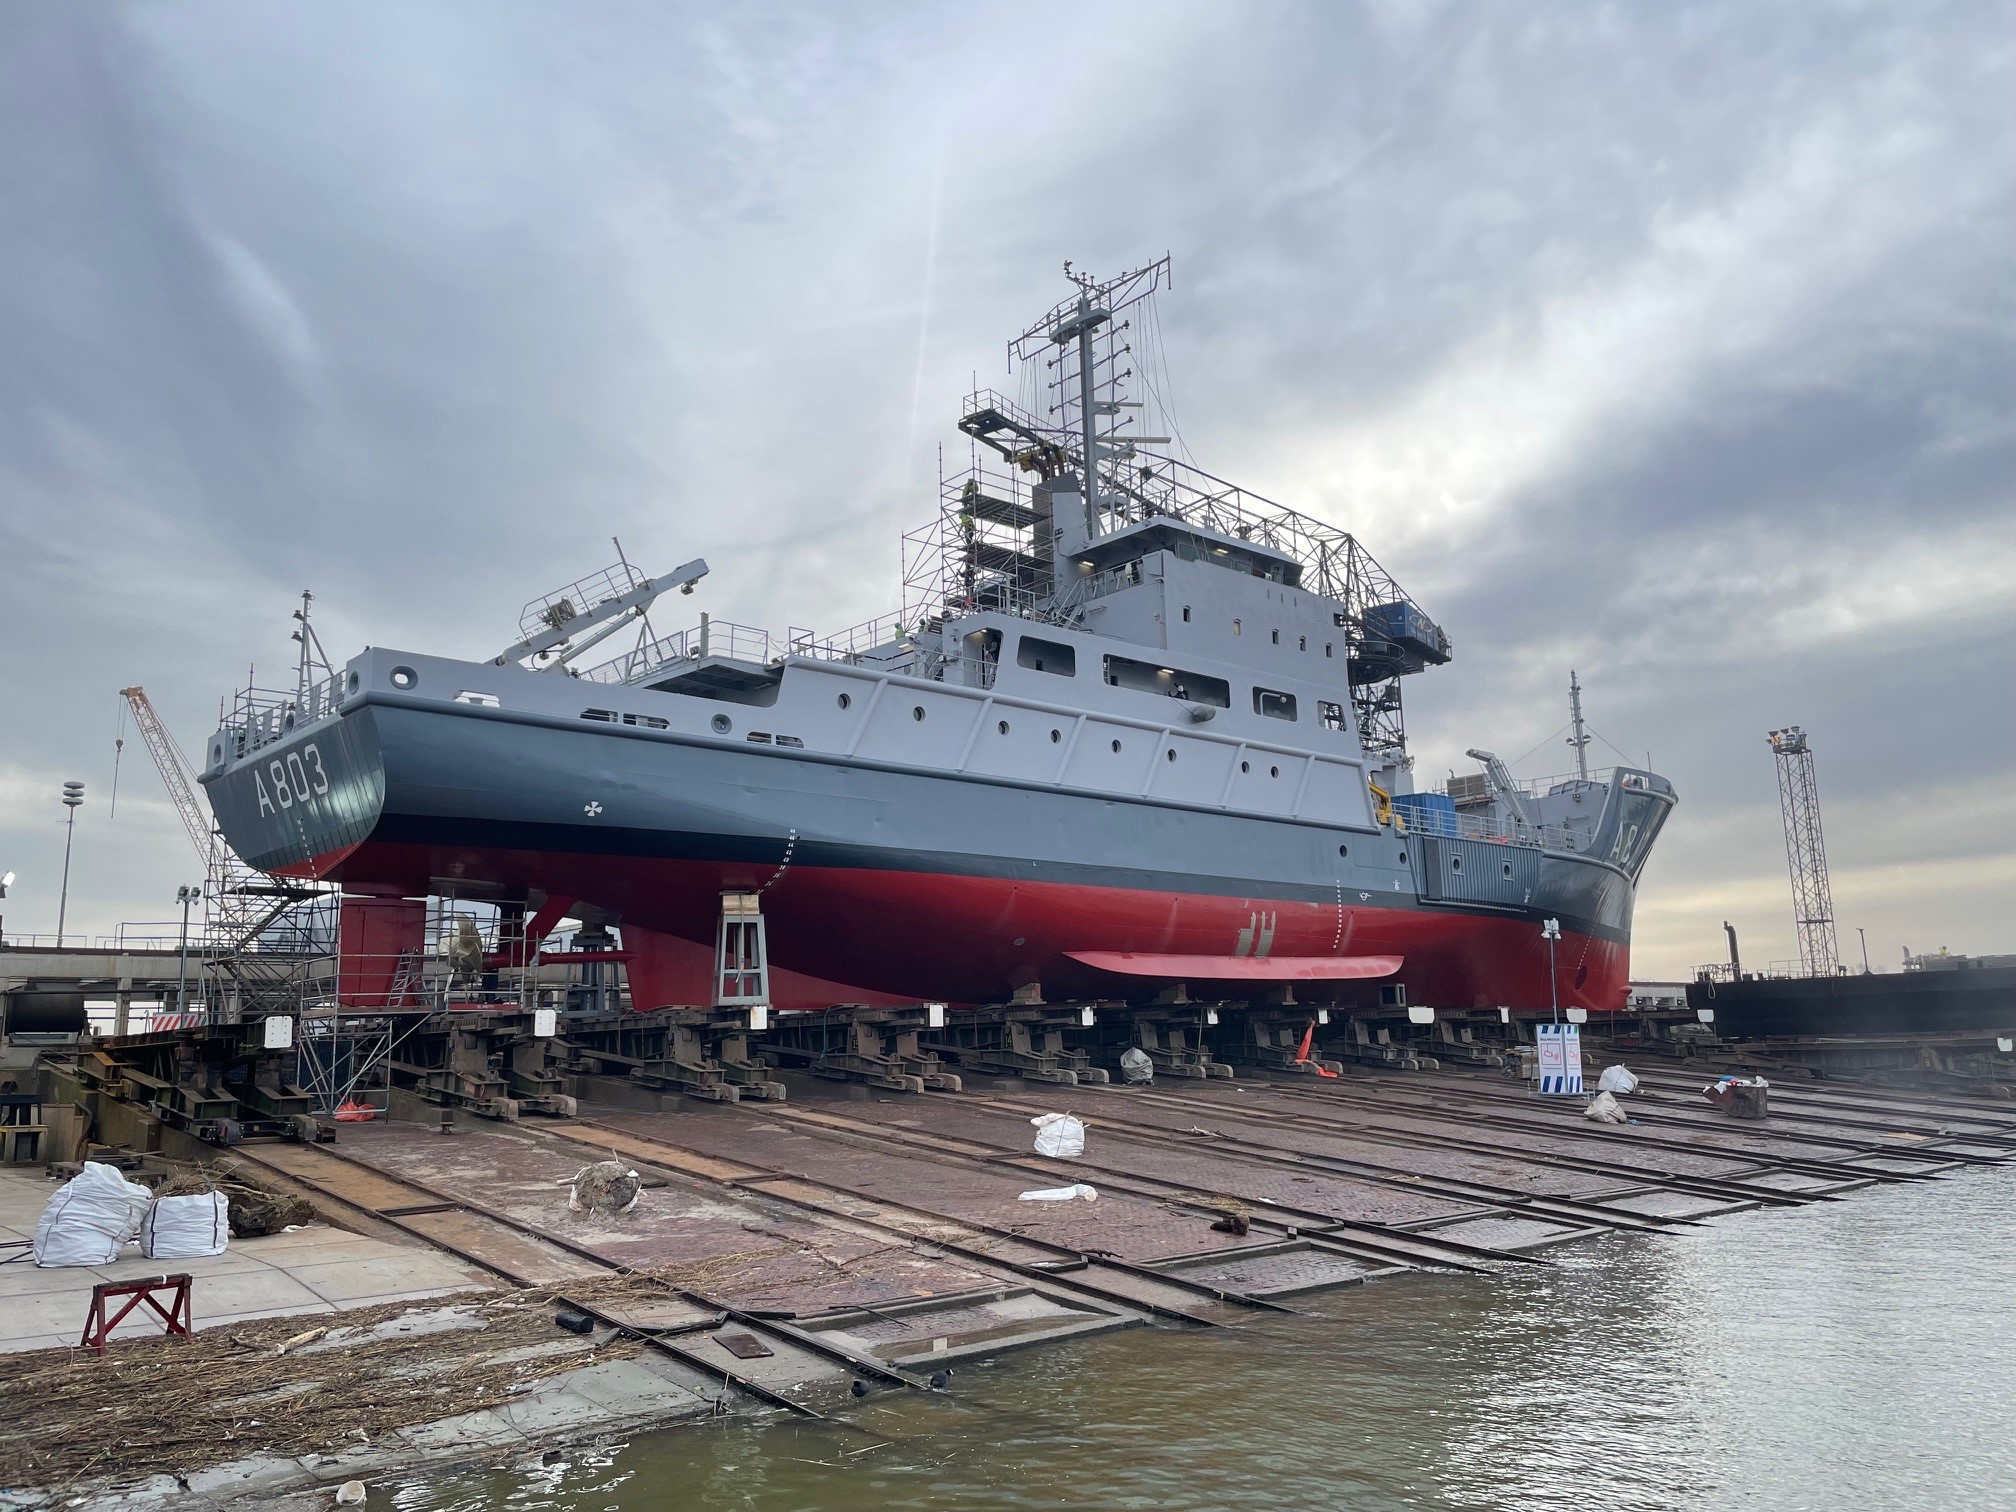 HNLMS Luymes in dock for maintenance